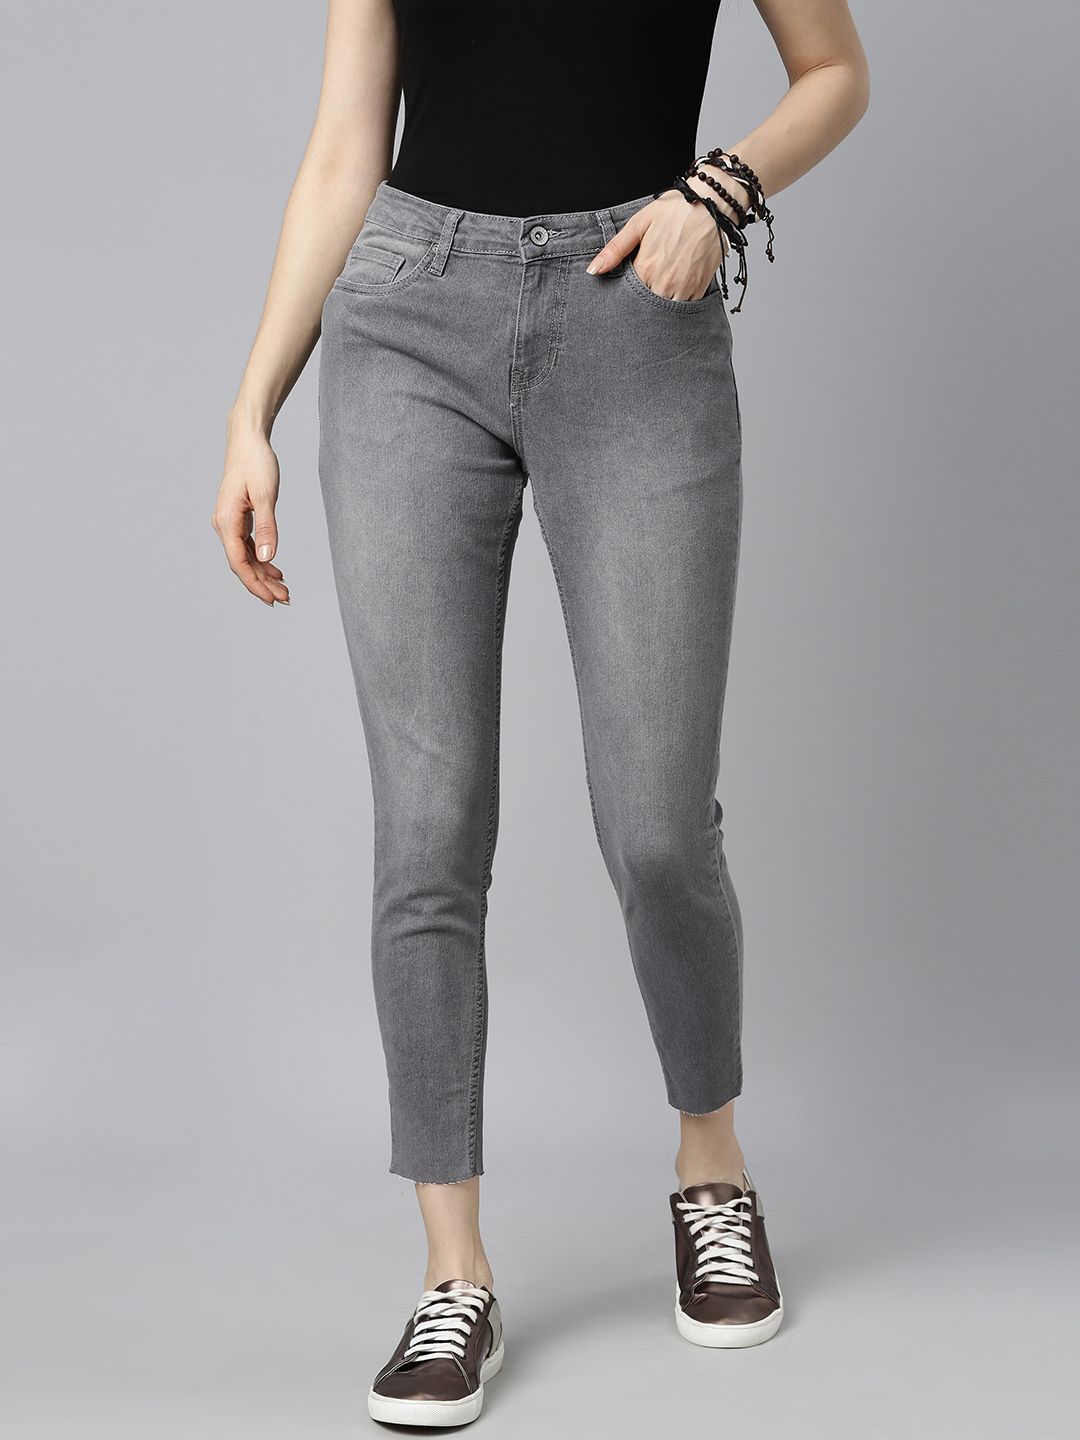 The Roadster Lifestyle Co Women Grey Slim Fit Mid-Rise Clean Look Stretchable Jeans Price in India